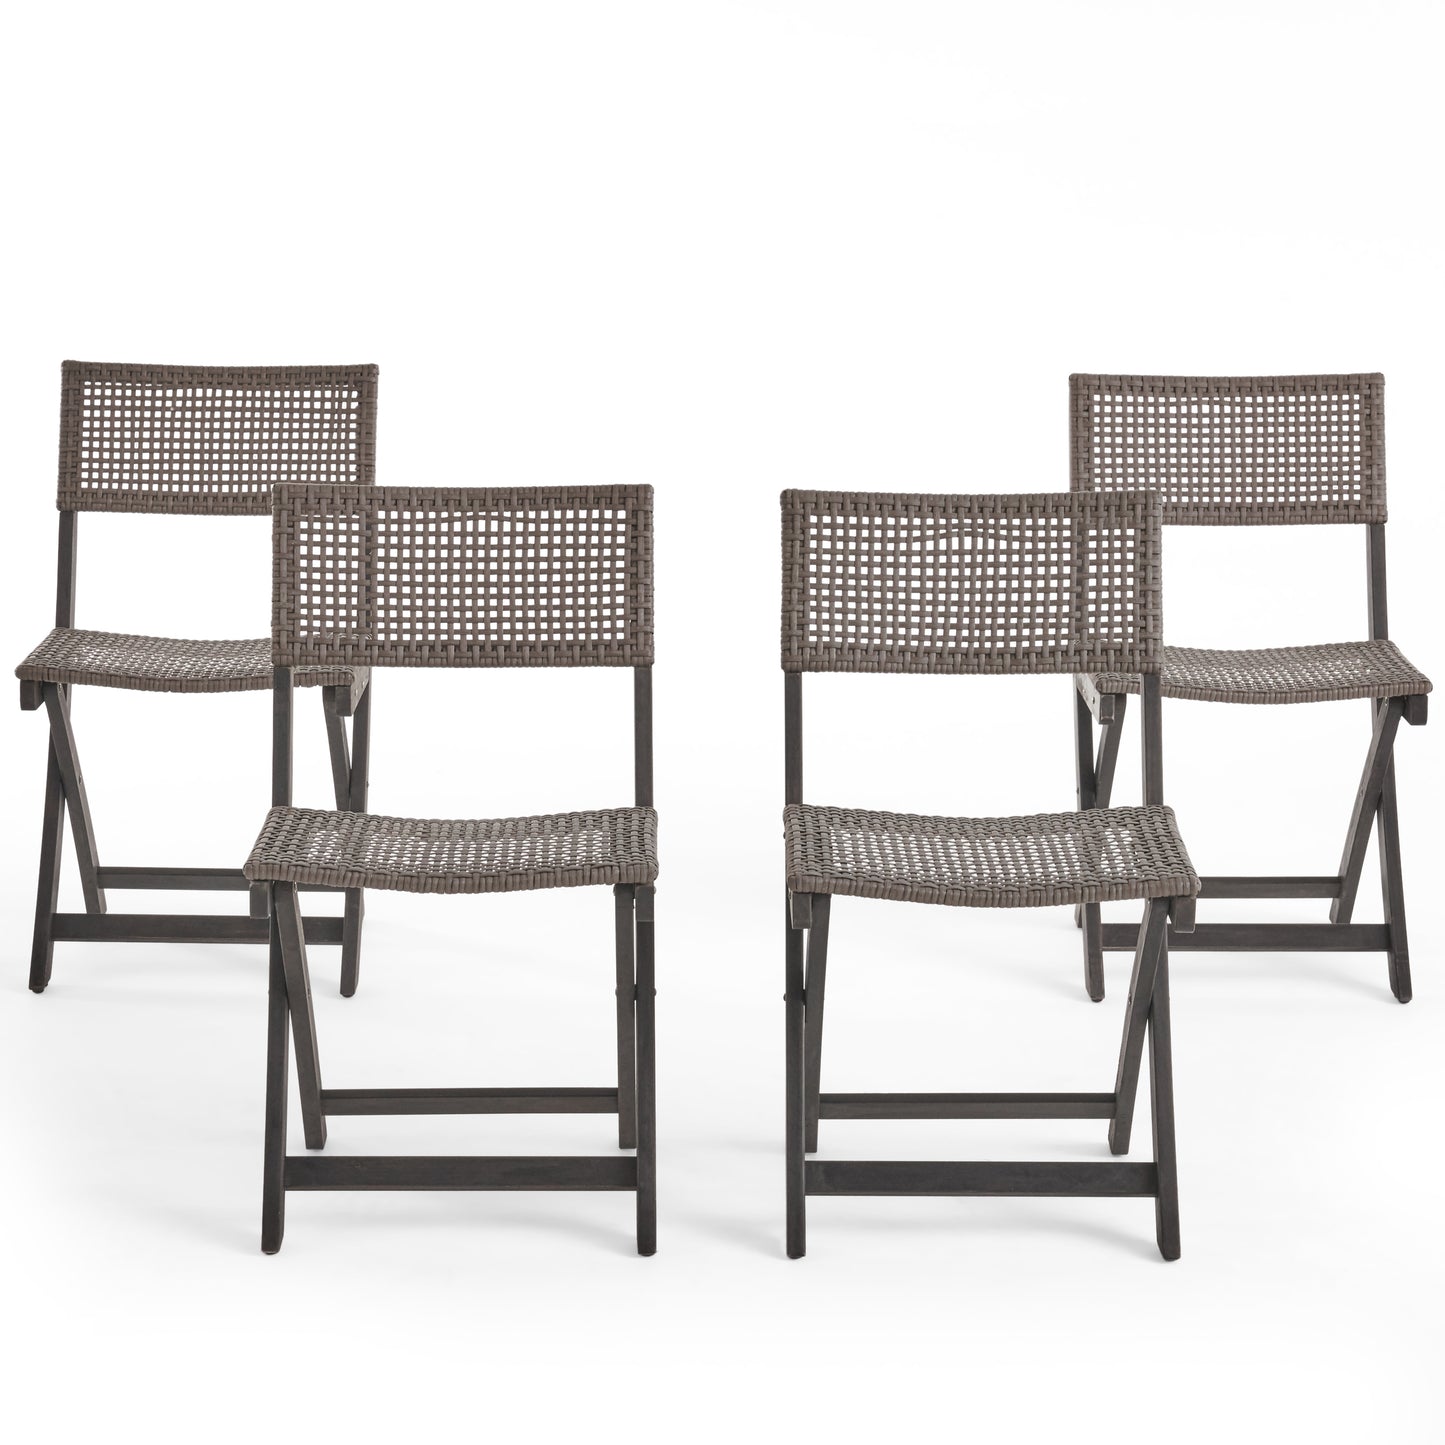 Truda Outdoor Acacia Wood Foldable Bistro Chairs with Wicker Seating (Set of 4)